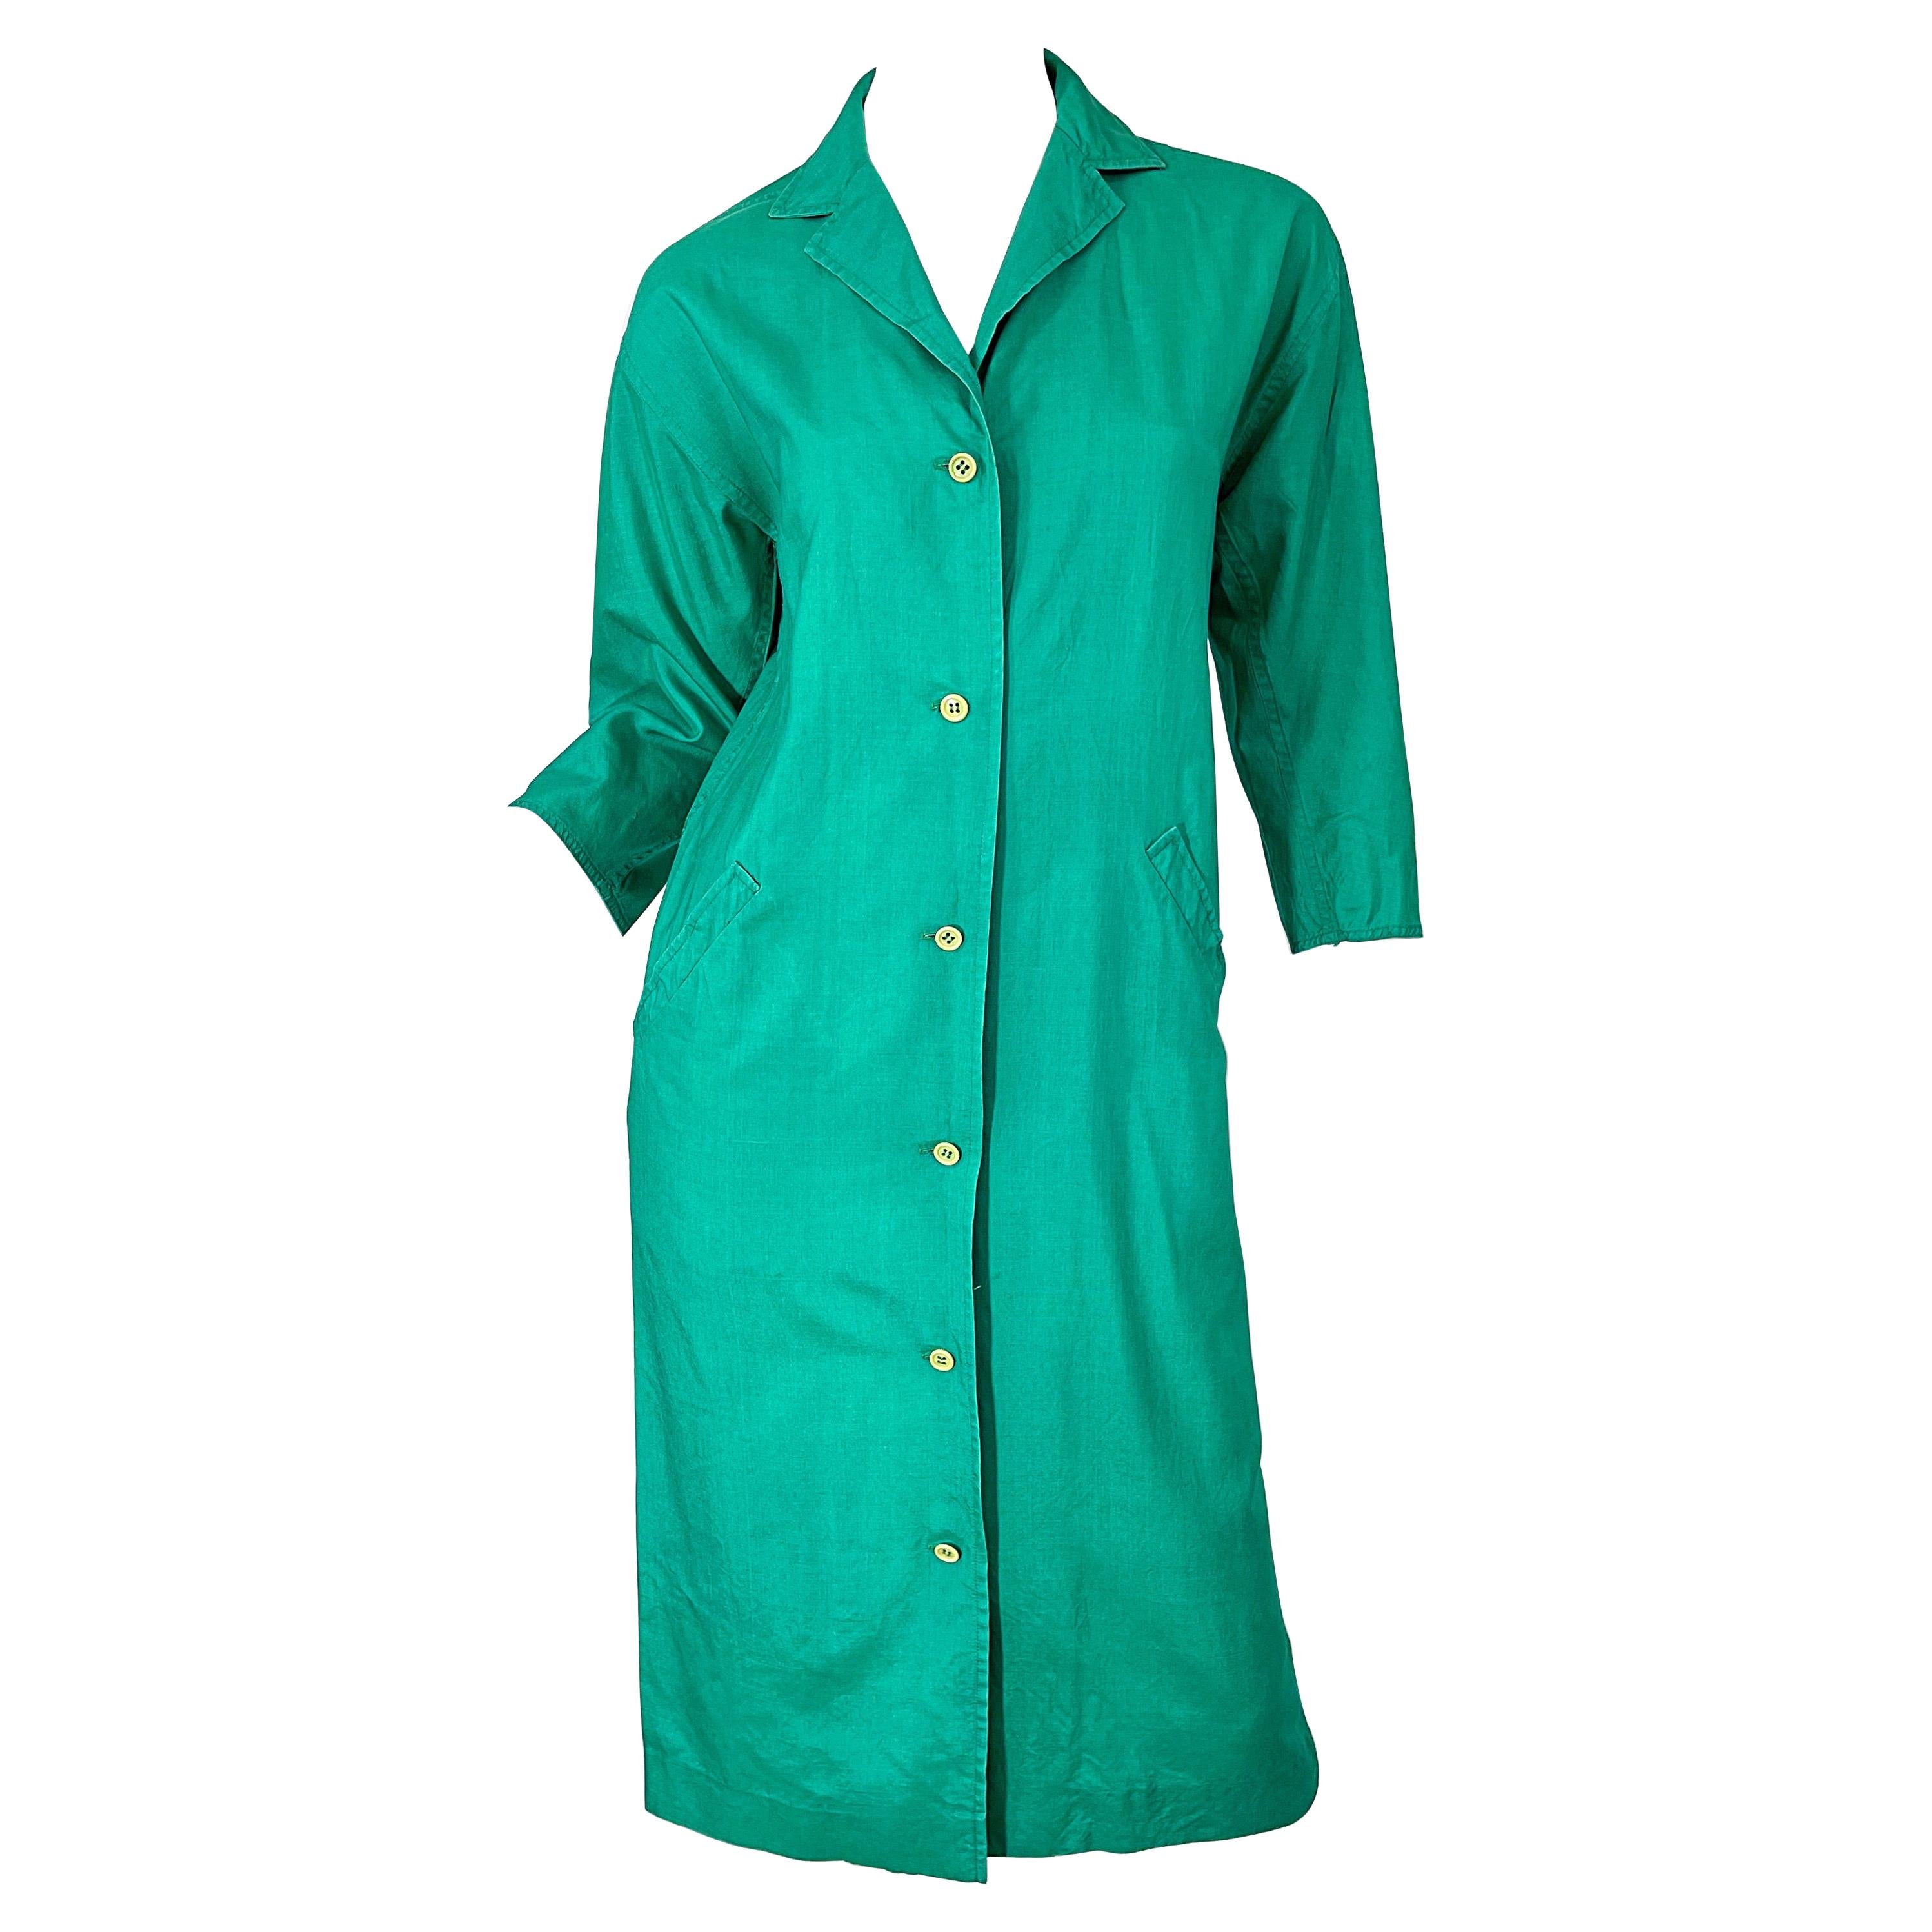 1970s Halston Kelly Green Silk 3/4 Sleeves Vintage 70s Shirt Dress w/ Pockets For Sale